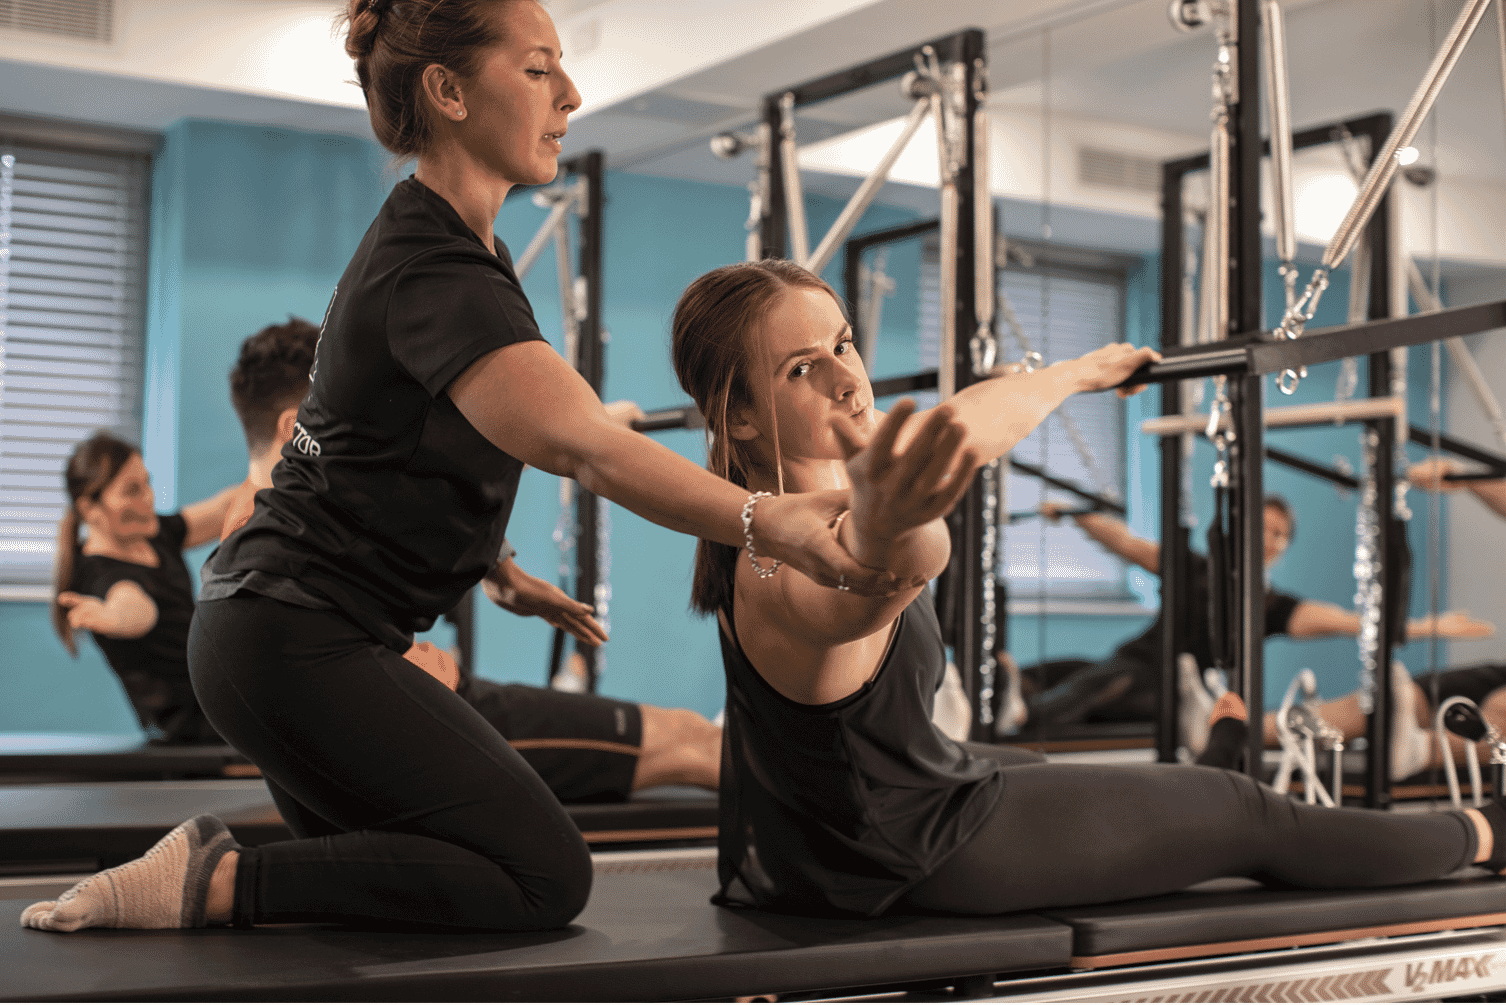 Reformer Pilates Group Exercise Services Fitness At Your Fingertips London  Personal Trainer, Hiit Pilates Reformer